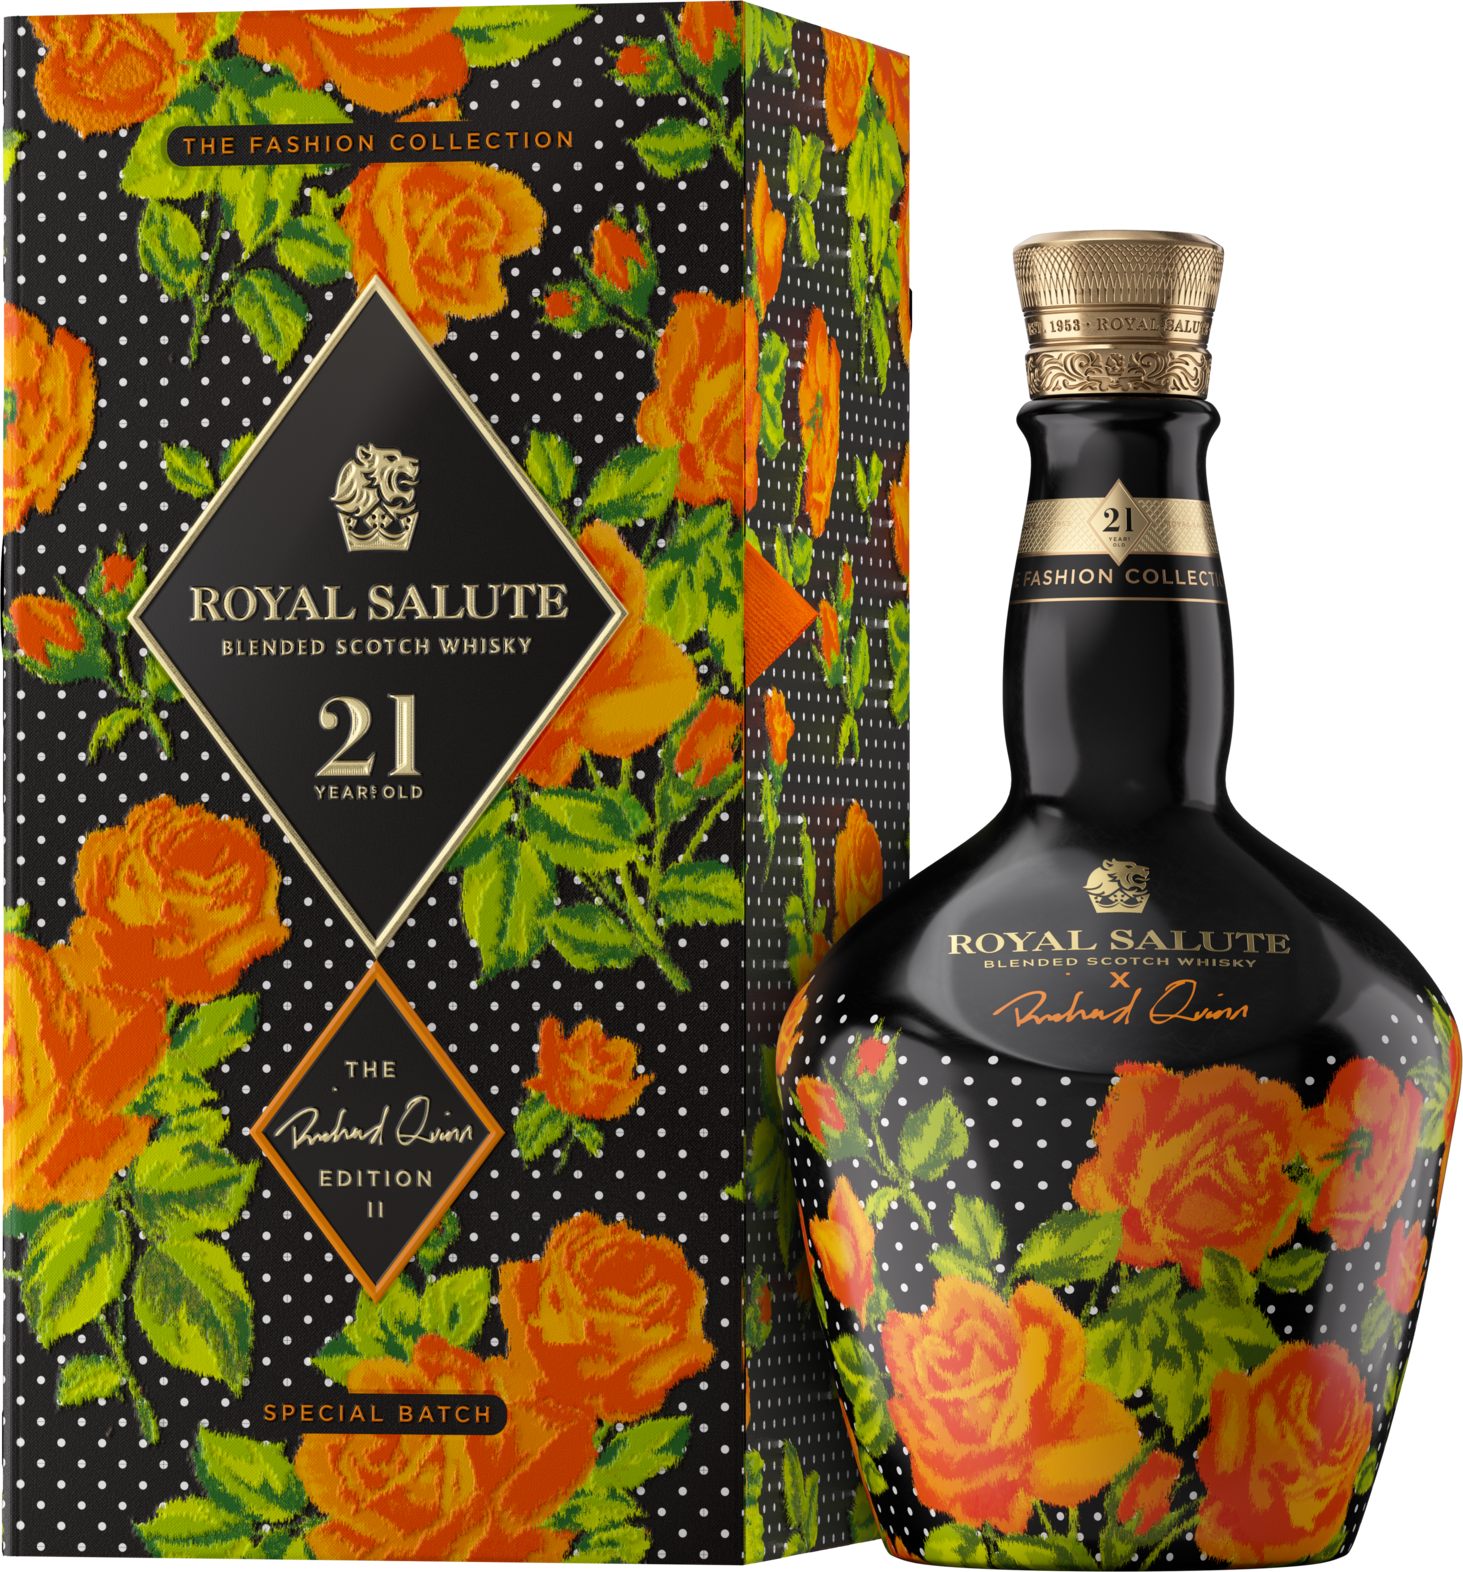 SPHERE's Christmas Gift Guide Part Two - Royal Salute